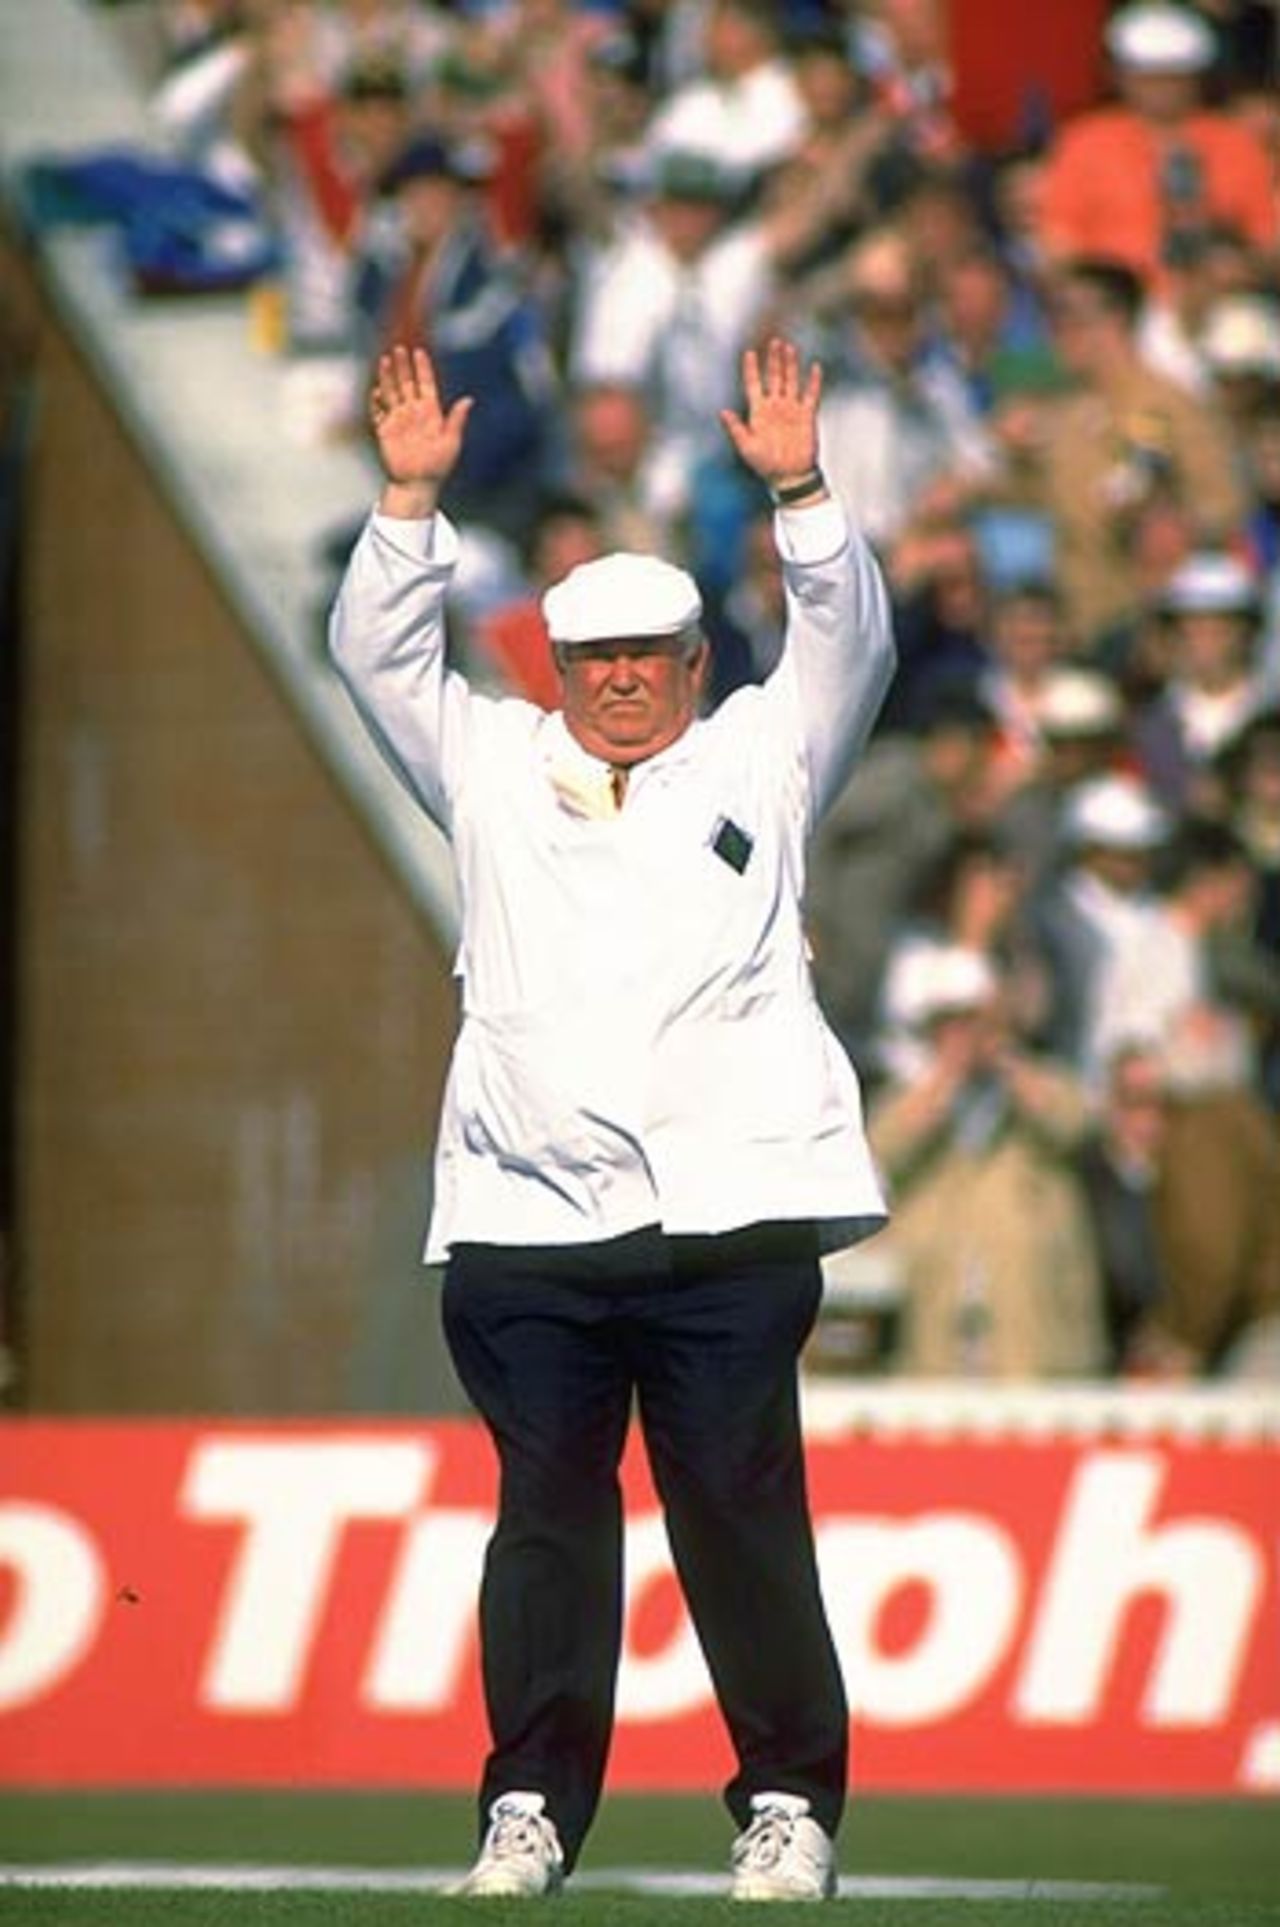 Put your hands in the air - David Shepherd signals a six during a
one-day match between England and Australia at Manchester, May 19, 1993